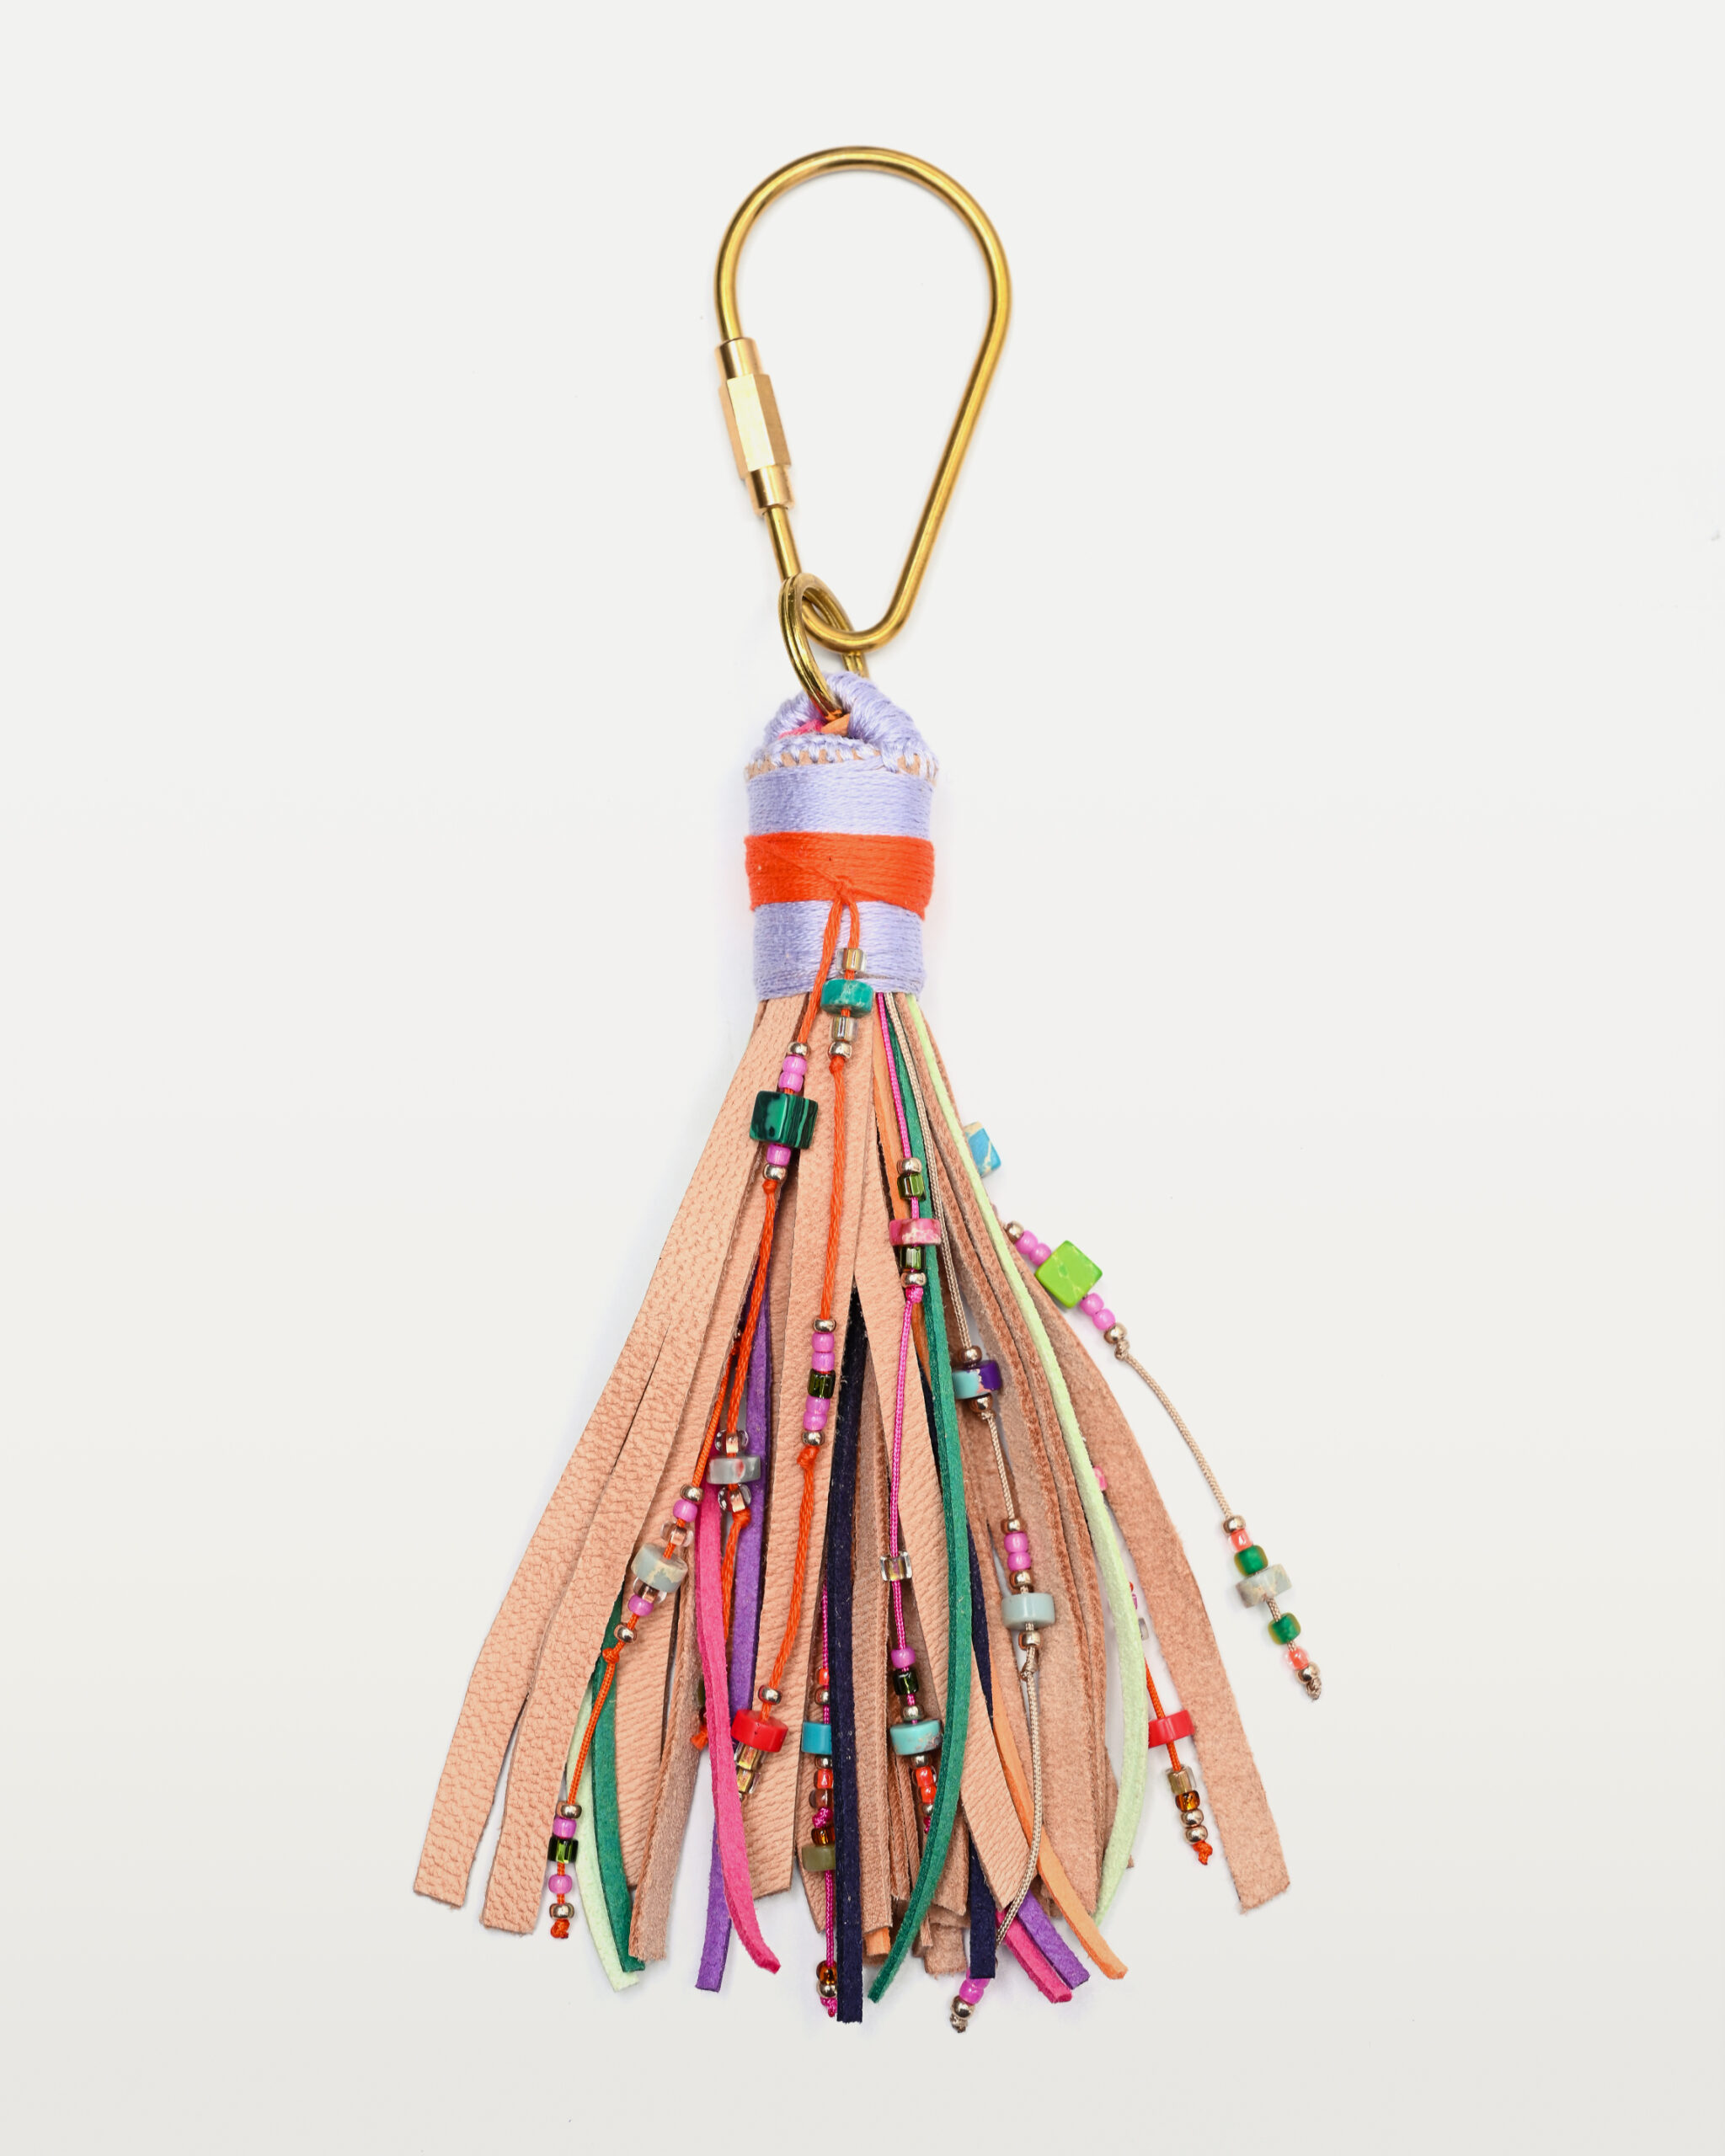 Leather Cotton And Beads Colorful Bag Charm - Doreen Arts Jewelry